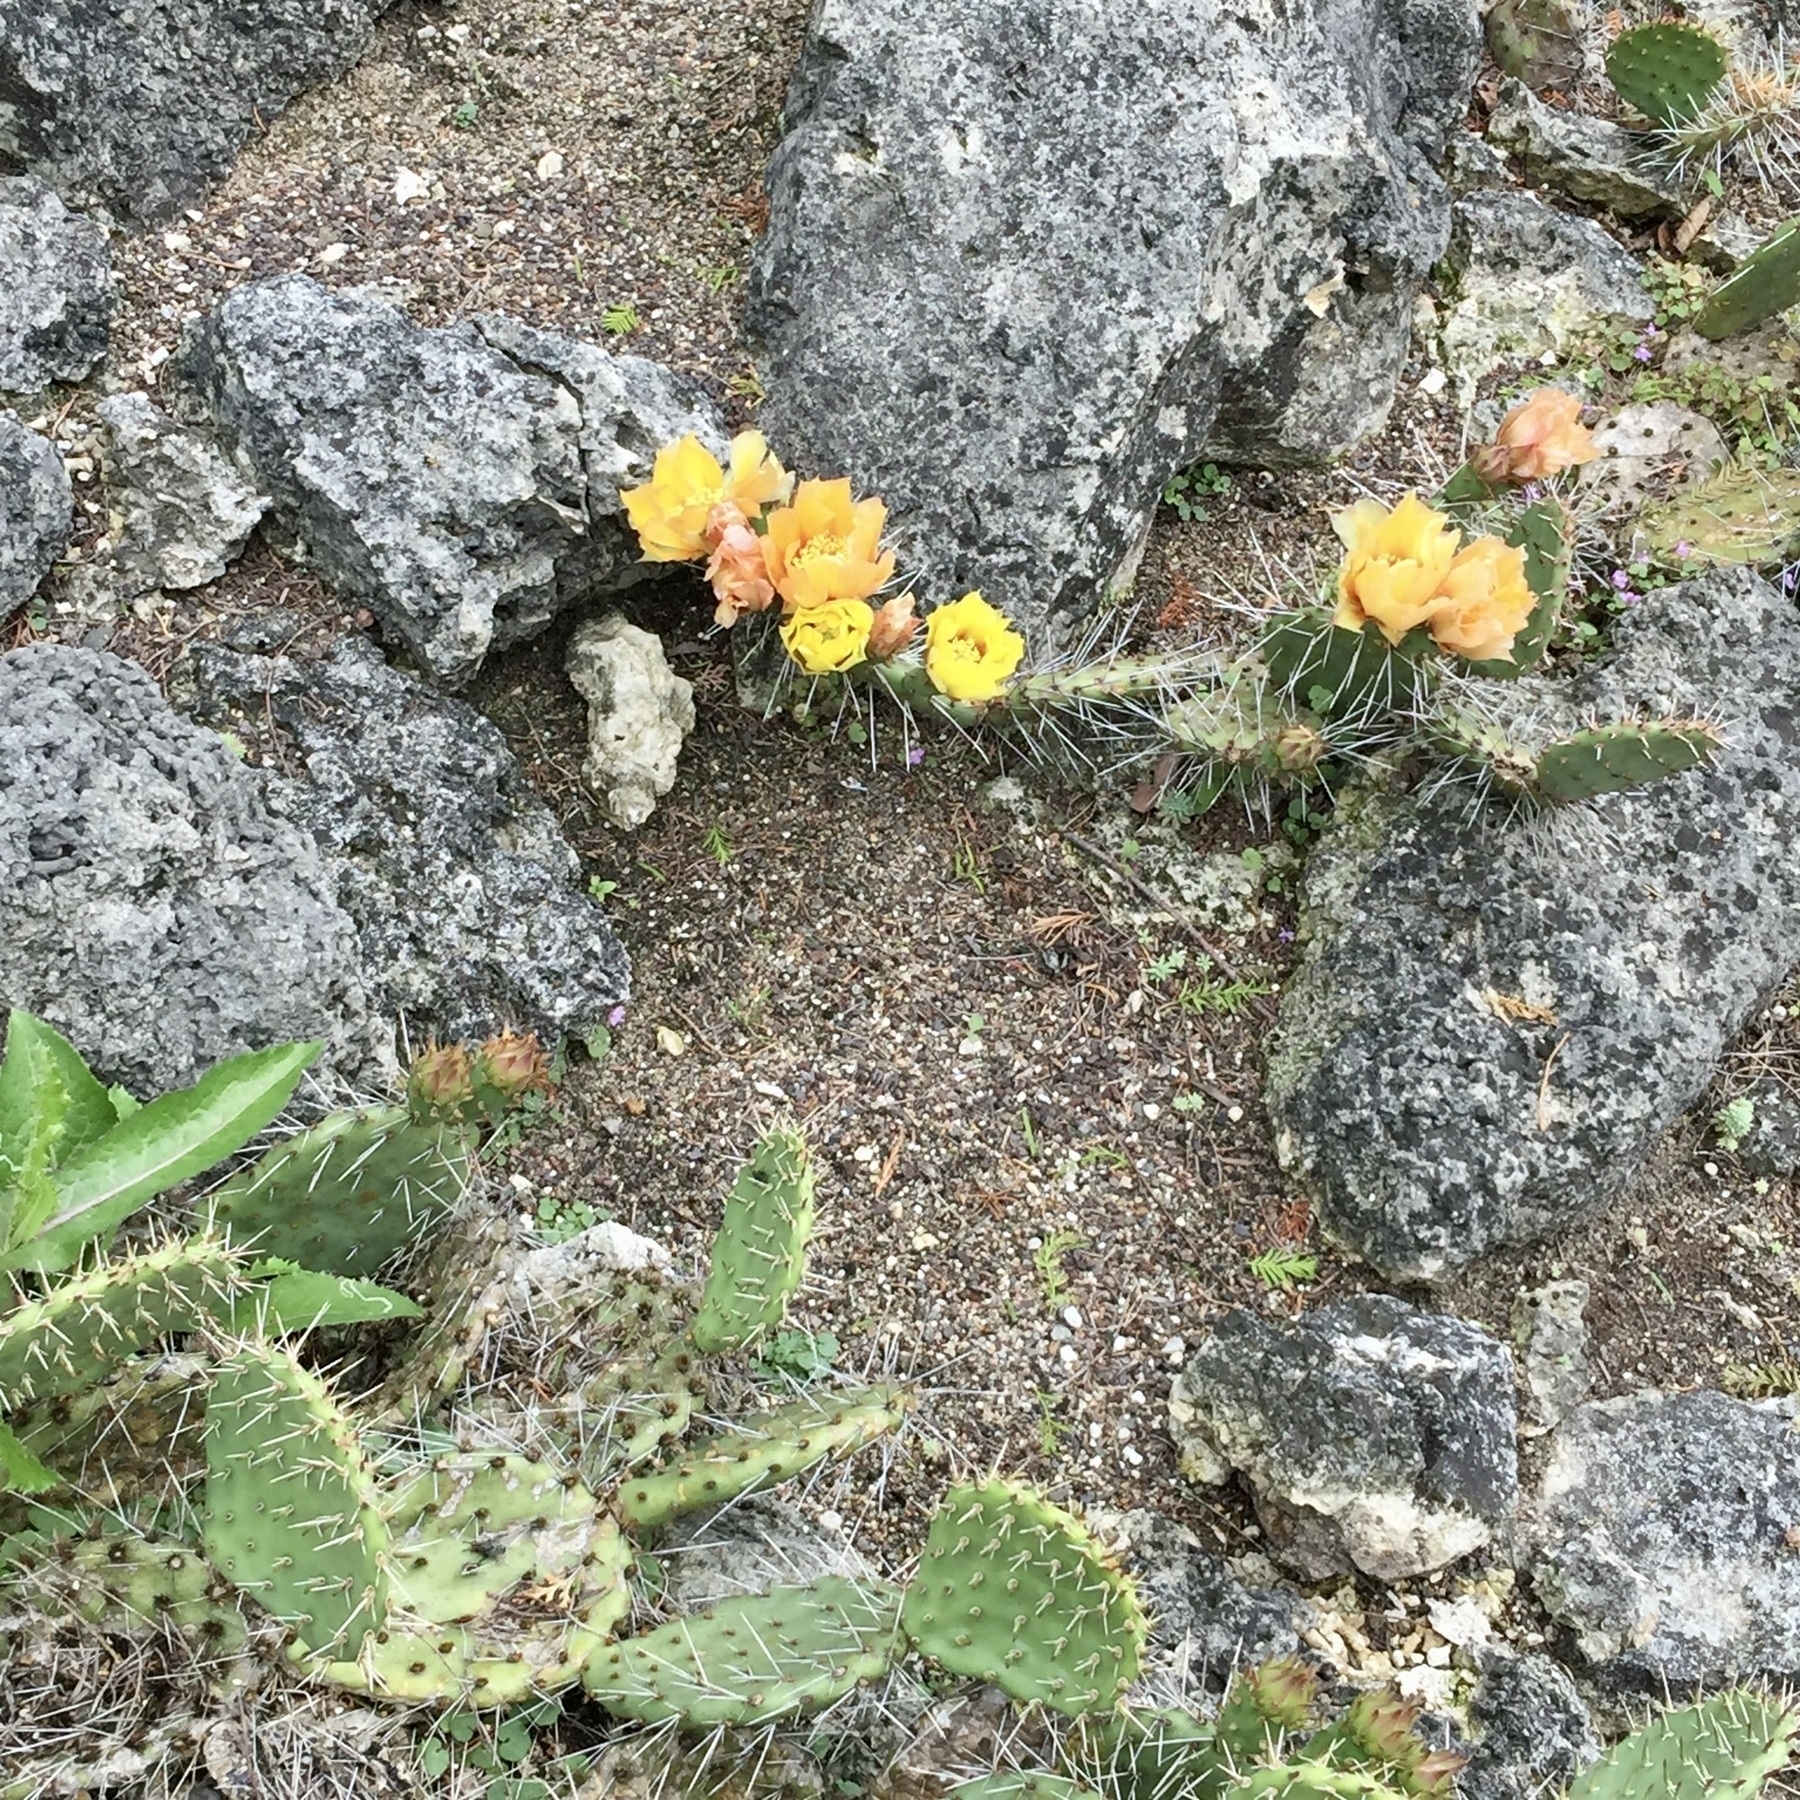 Prickly pear cactus with yellow blossom against grey rock